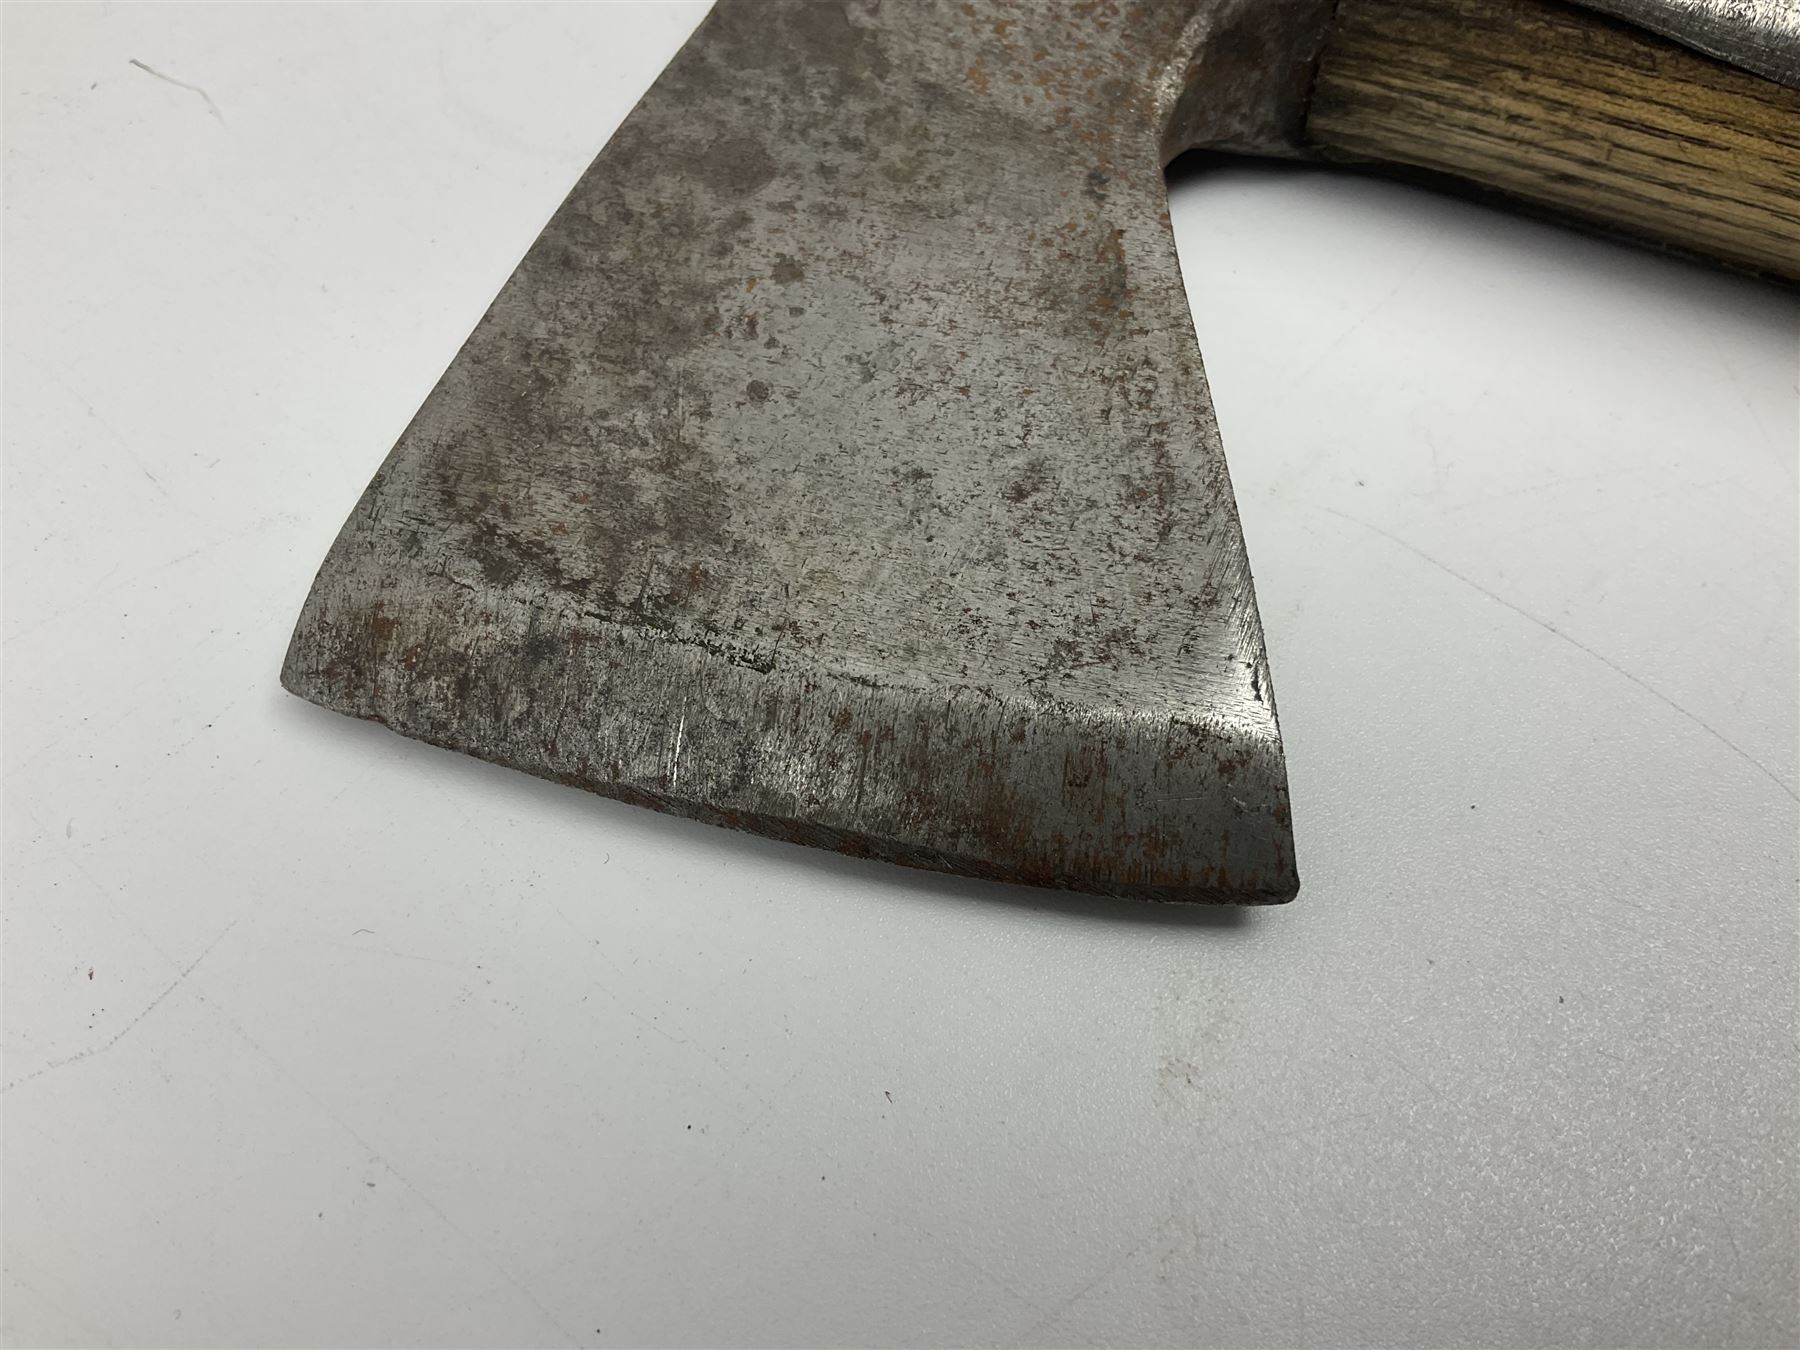 Post-War military type fireman's axe impressed 'PERKS 1953/54' with additional indistinct mark proba - Image 10 of 19